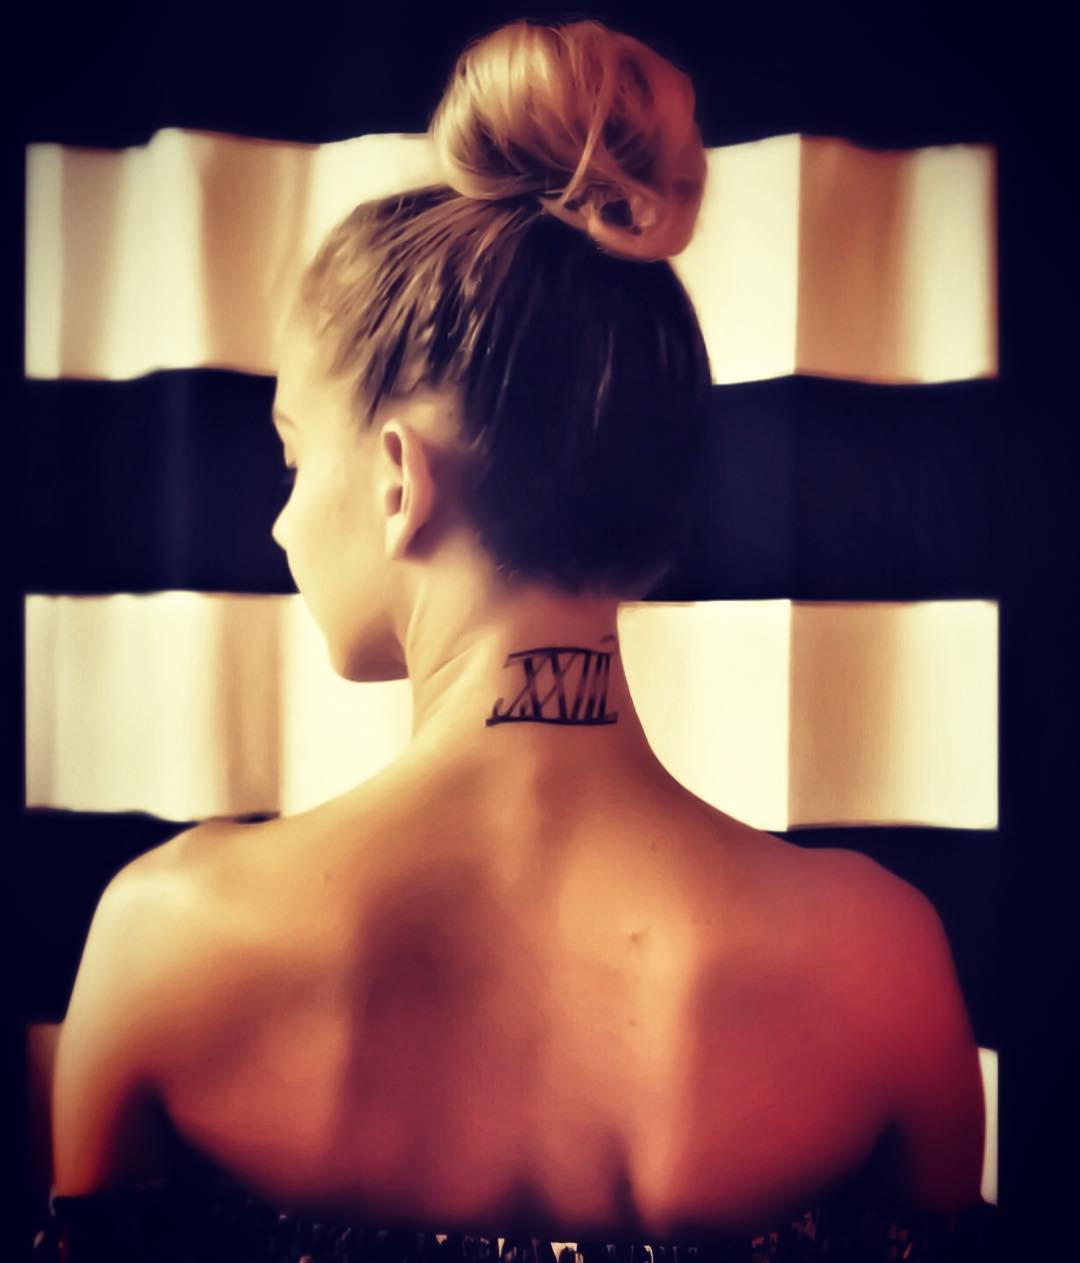 Roman Numerals Tattoo Idea To Keep Some Dates Or Figures Permanent On the Neck